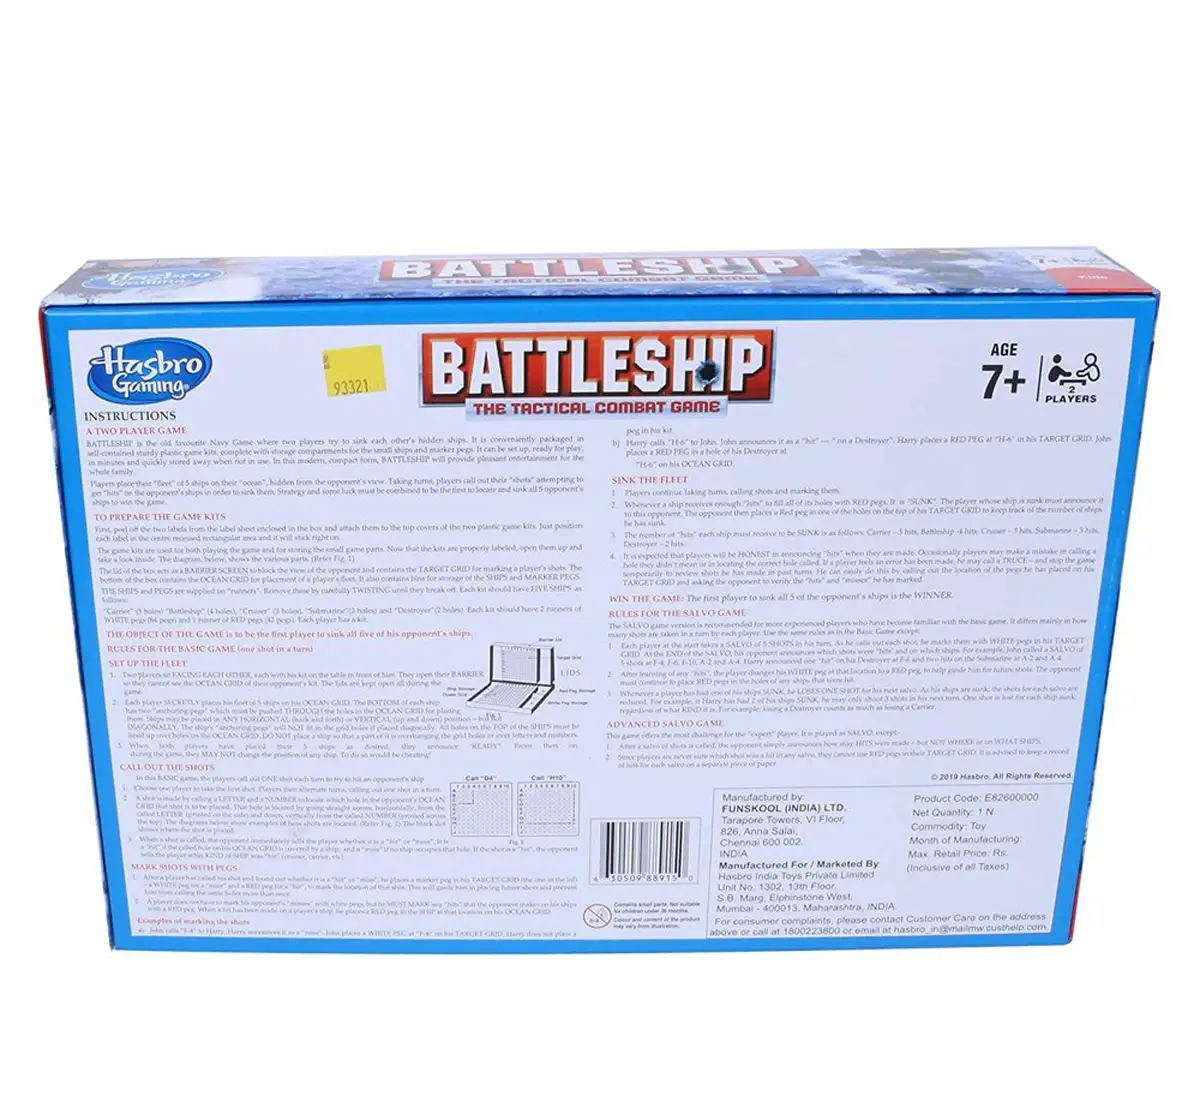 Hasbro Gaming Battleship Classic Strategy Board Game For Kids 7 Y+, Multicolour